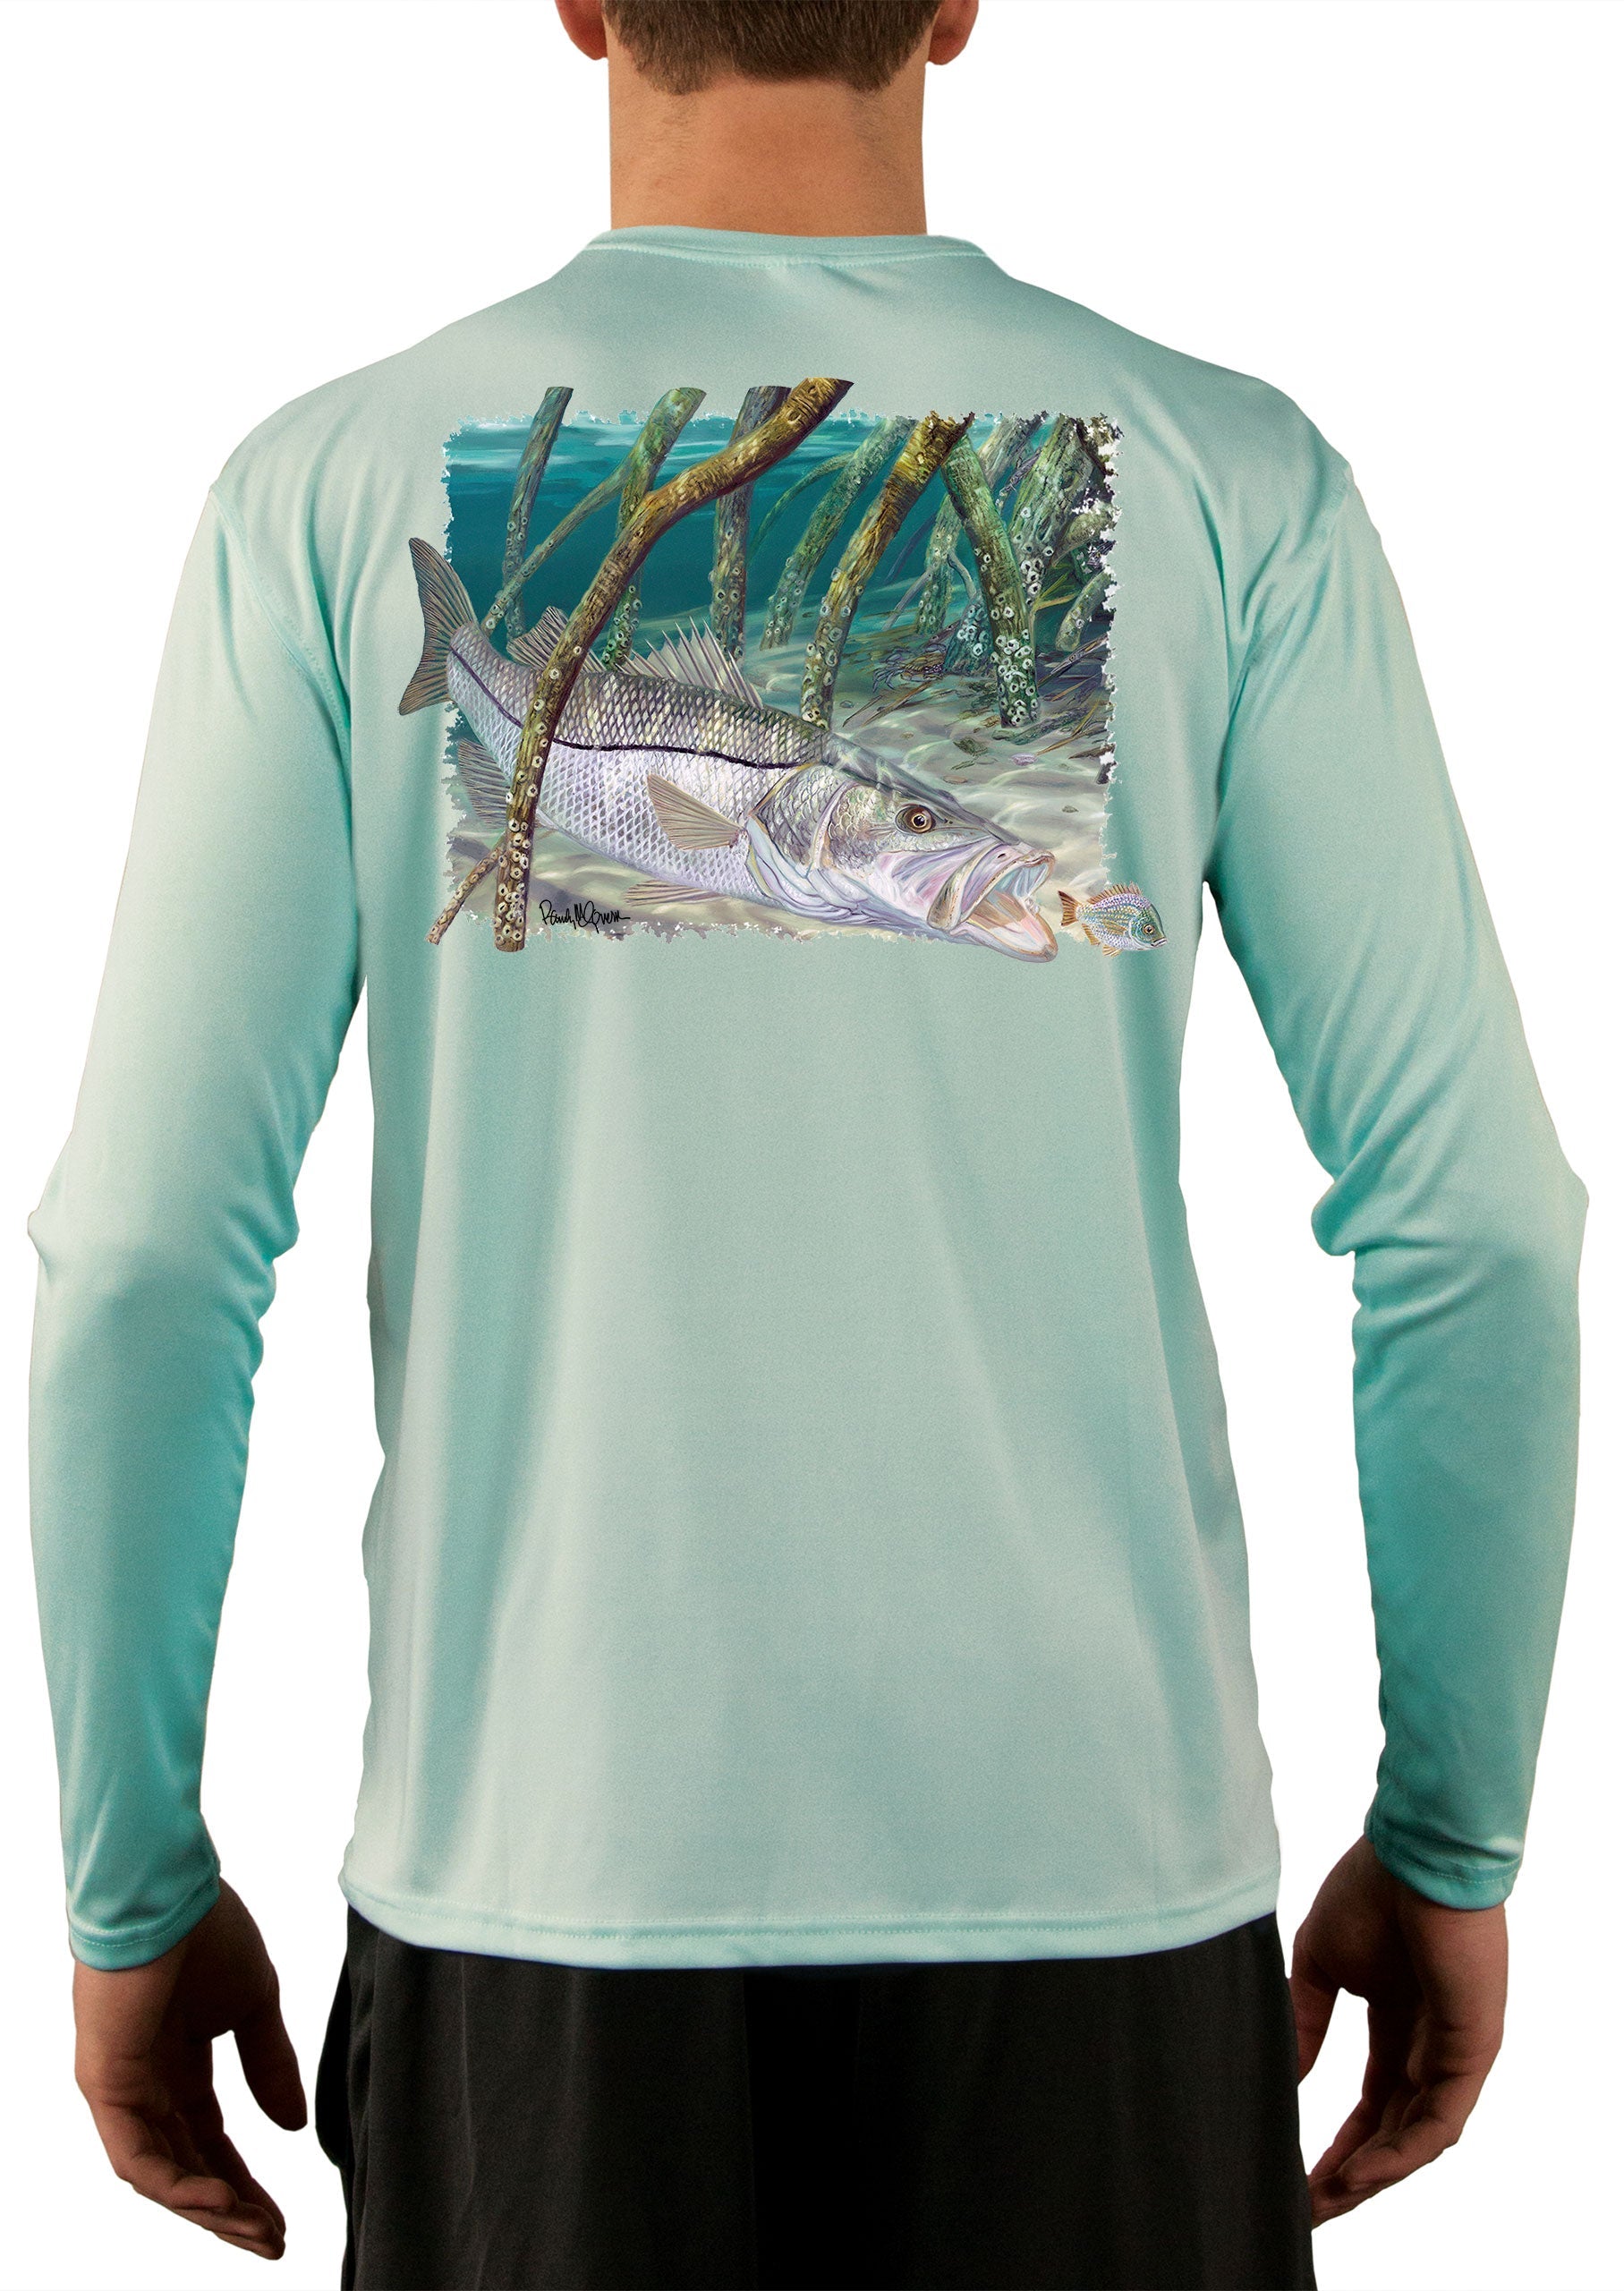 [New Artwork] Fishing Shirts for Men Snook Fish in Mangroves with Snook Scale Sleeve by Award Winning Artist Randy McGovern Seagrass / 3XL